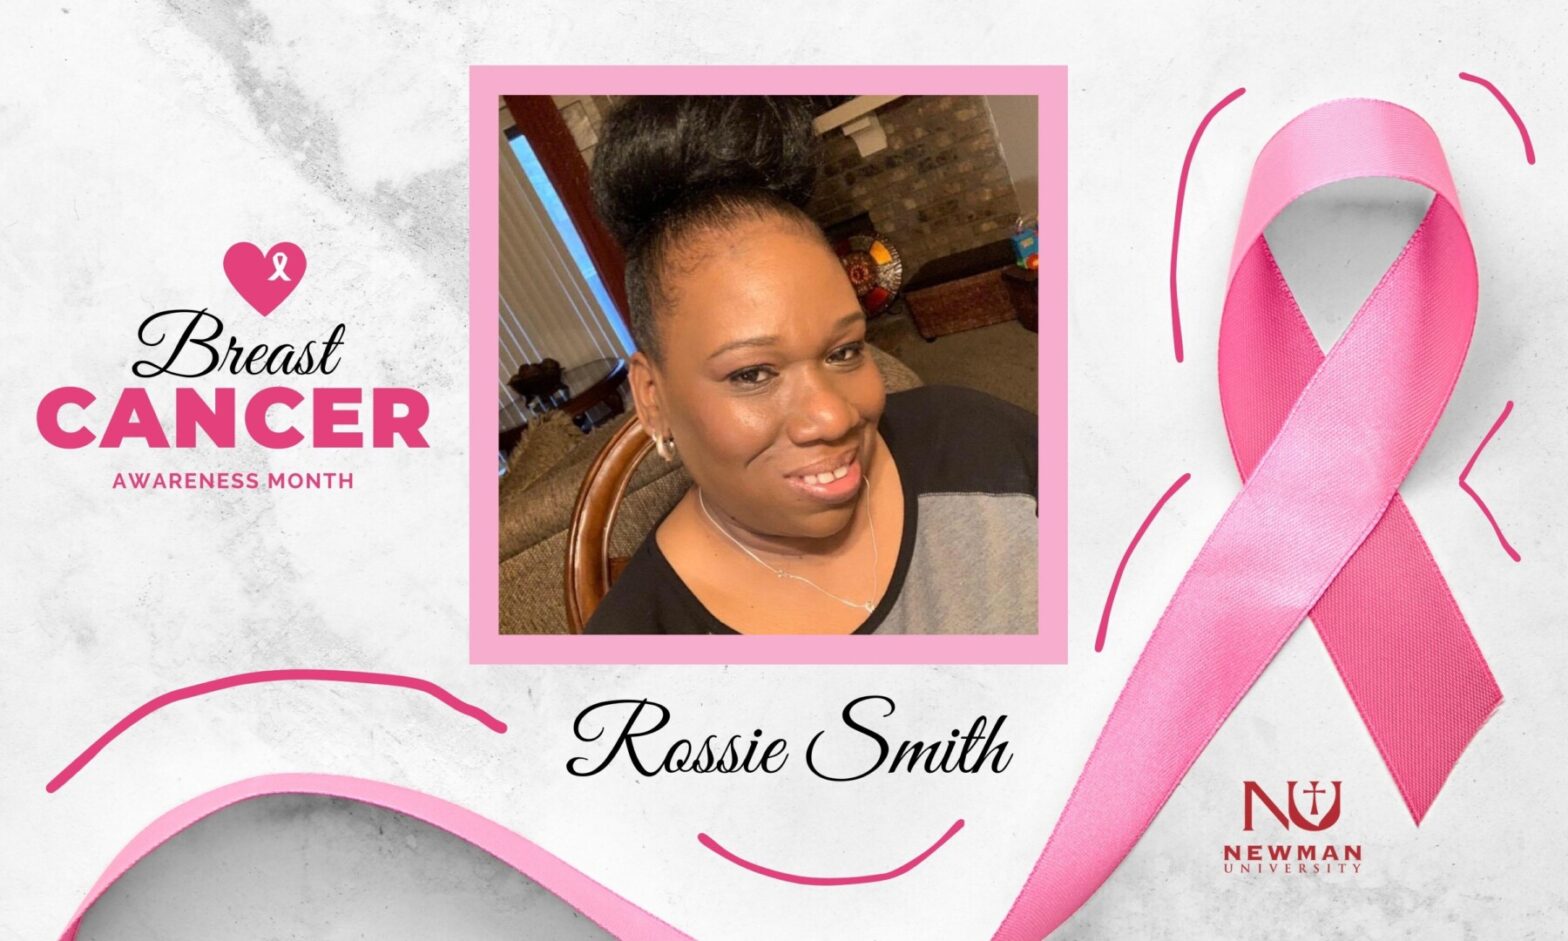 Rossie Smith (Breast Cancer Awareness Month)